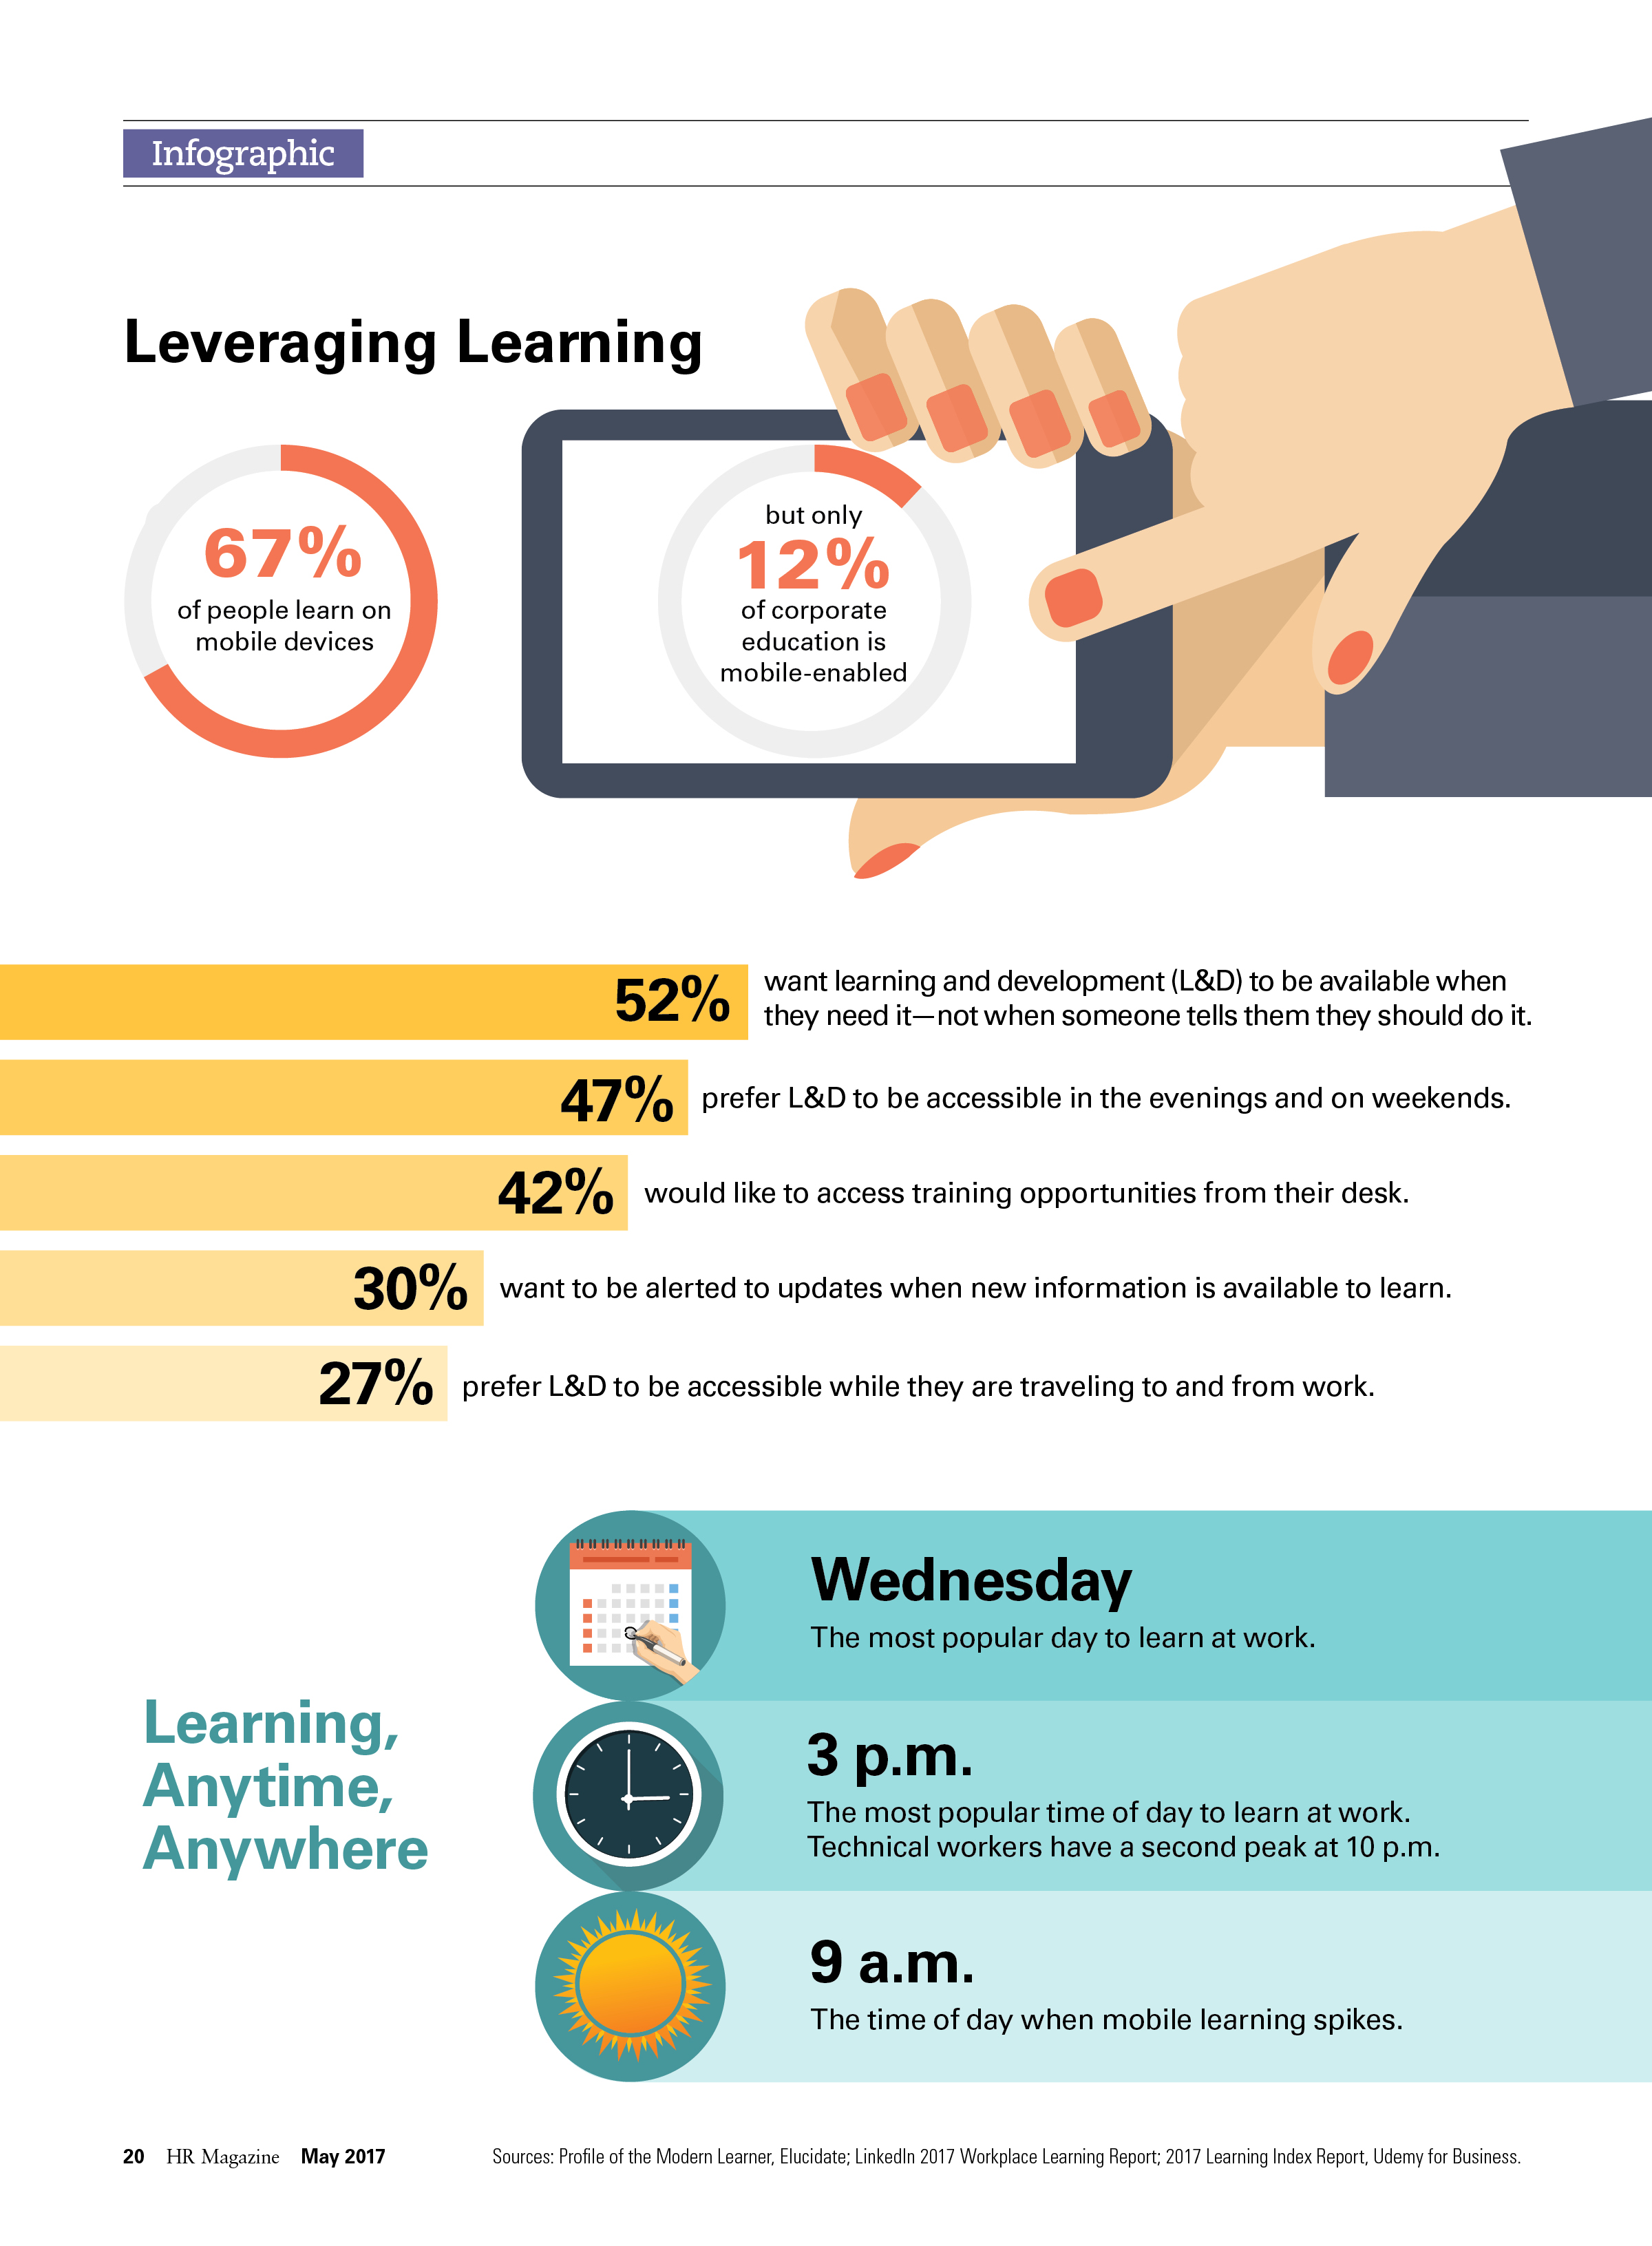 Leveraging Learning Infographic